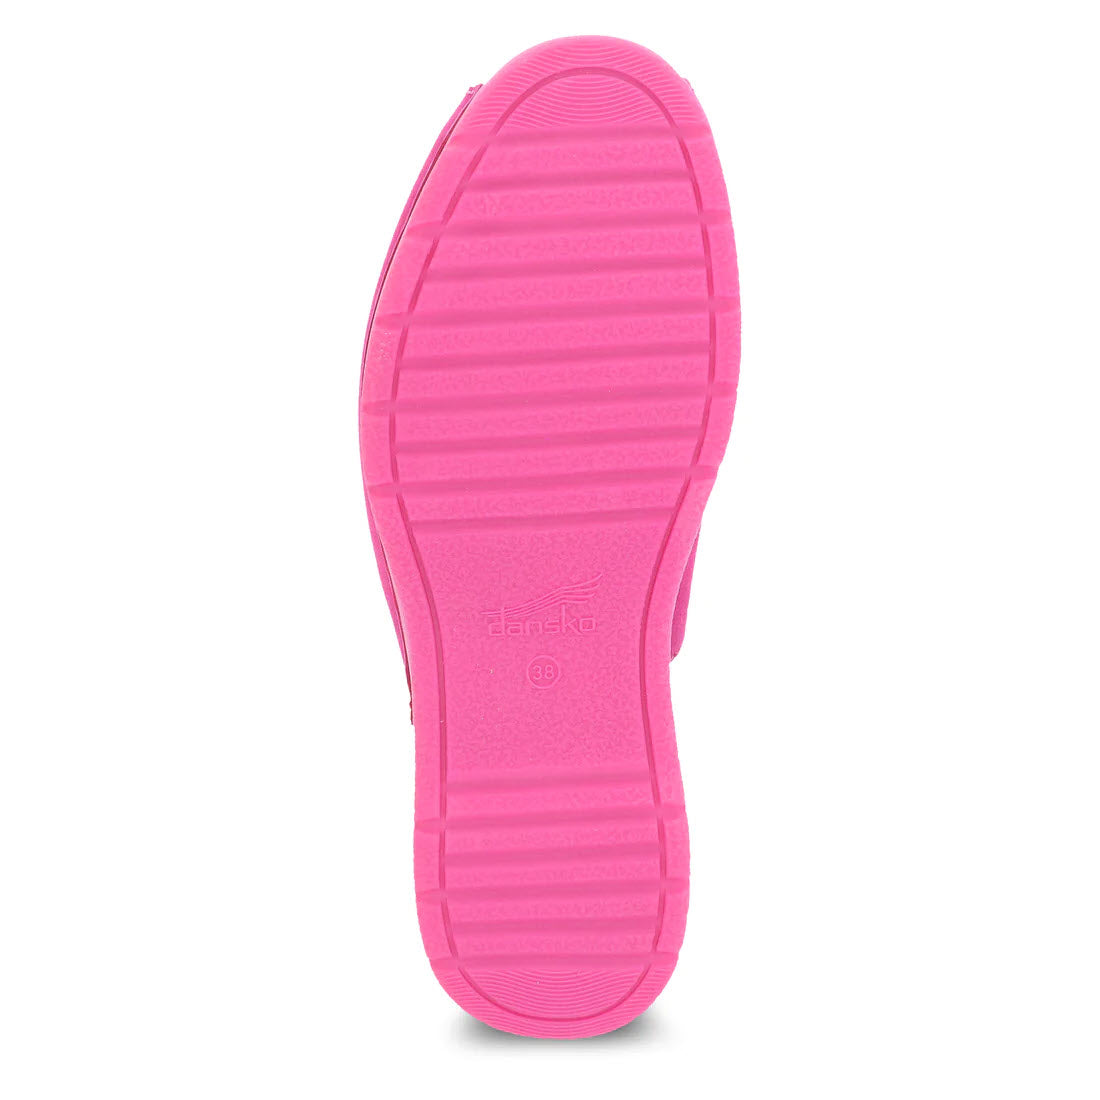 Bottom view of a bright pink Dansko Ravyn Fuchsia peep-toe sandal sole with textured patterns and the brand name &quot;Dansko&quot; embossed on it.